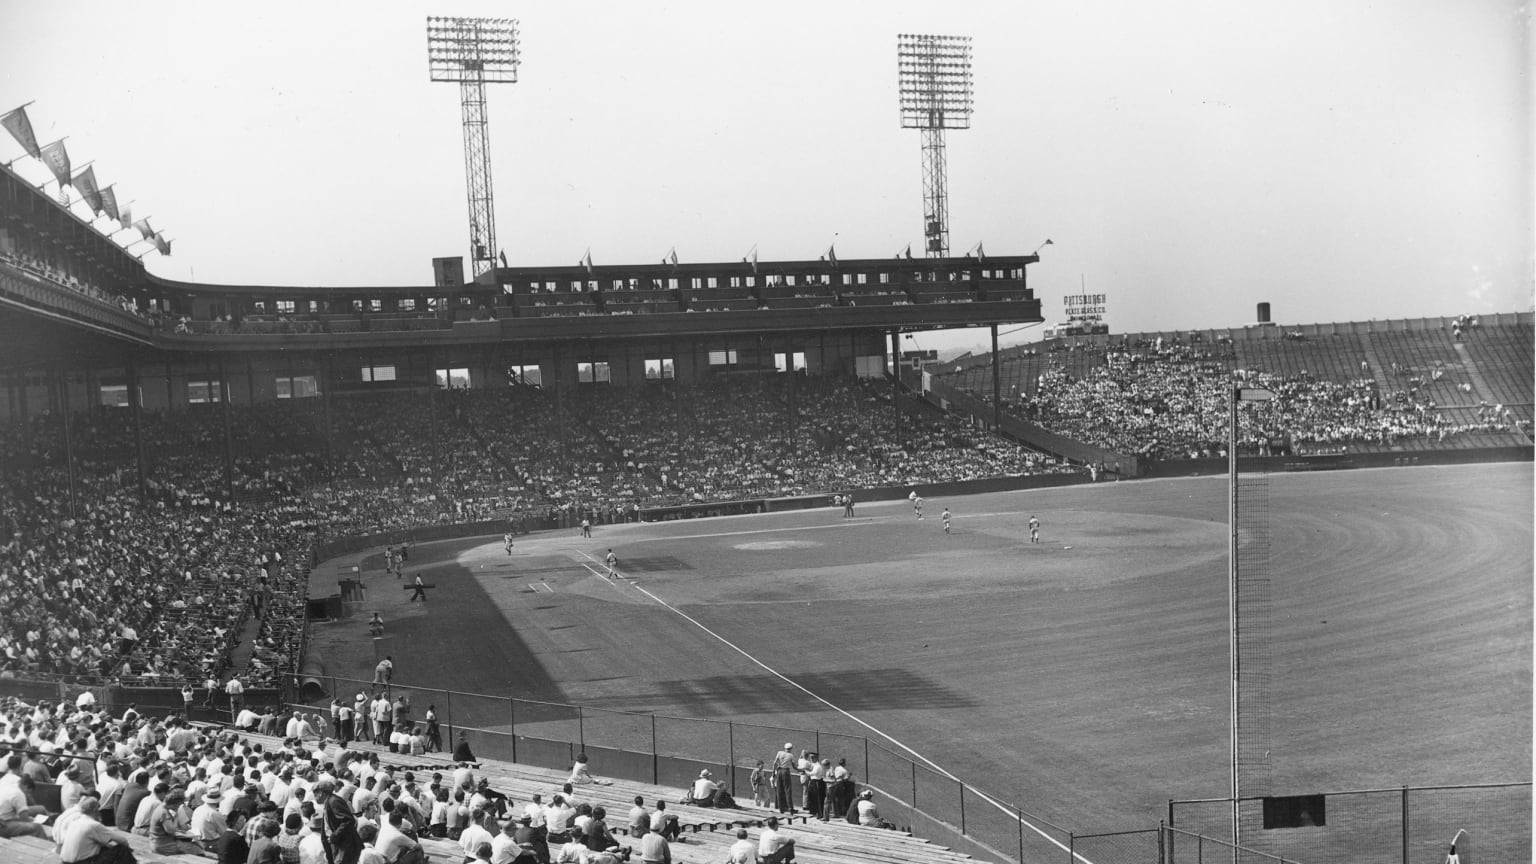 Braves Field: An Imperfect History of the Perfect Ballpark